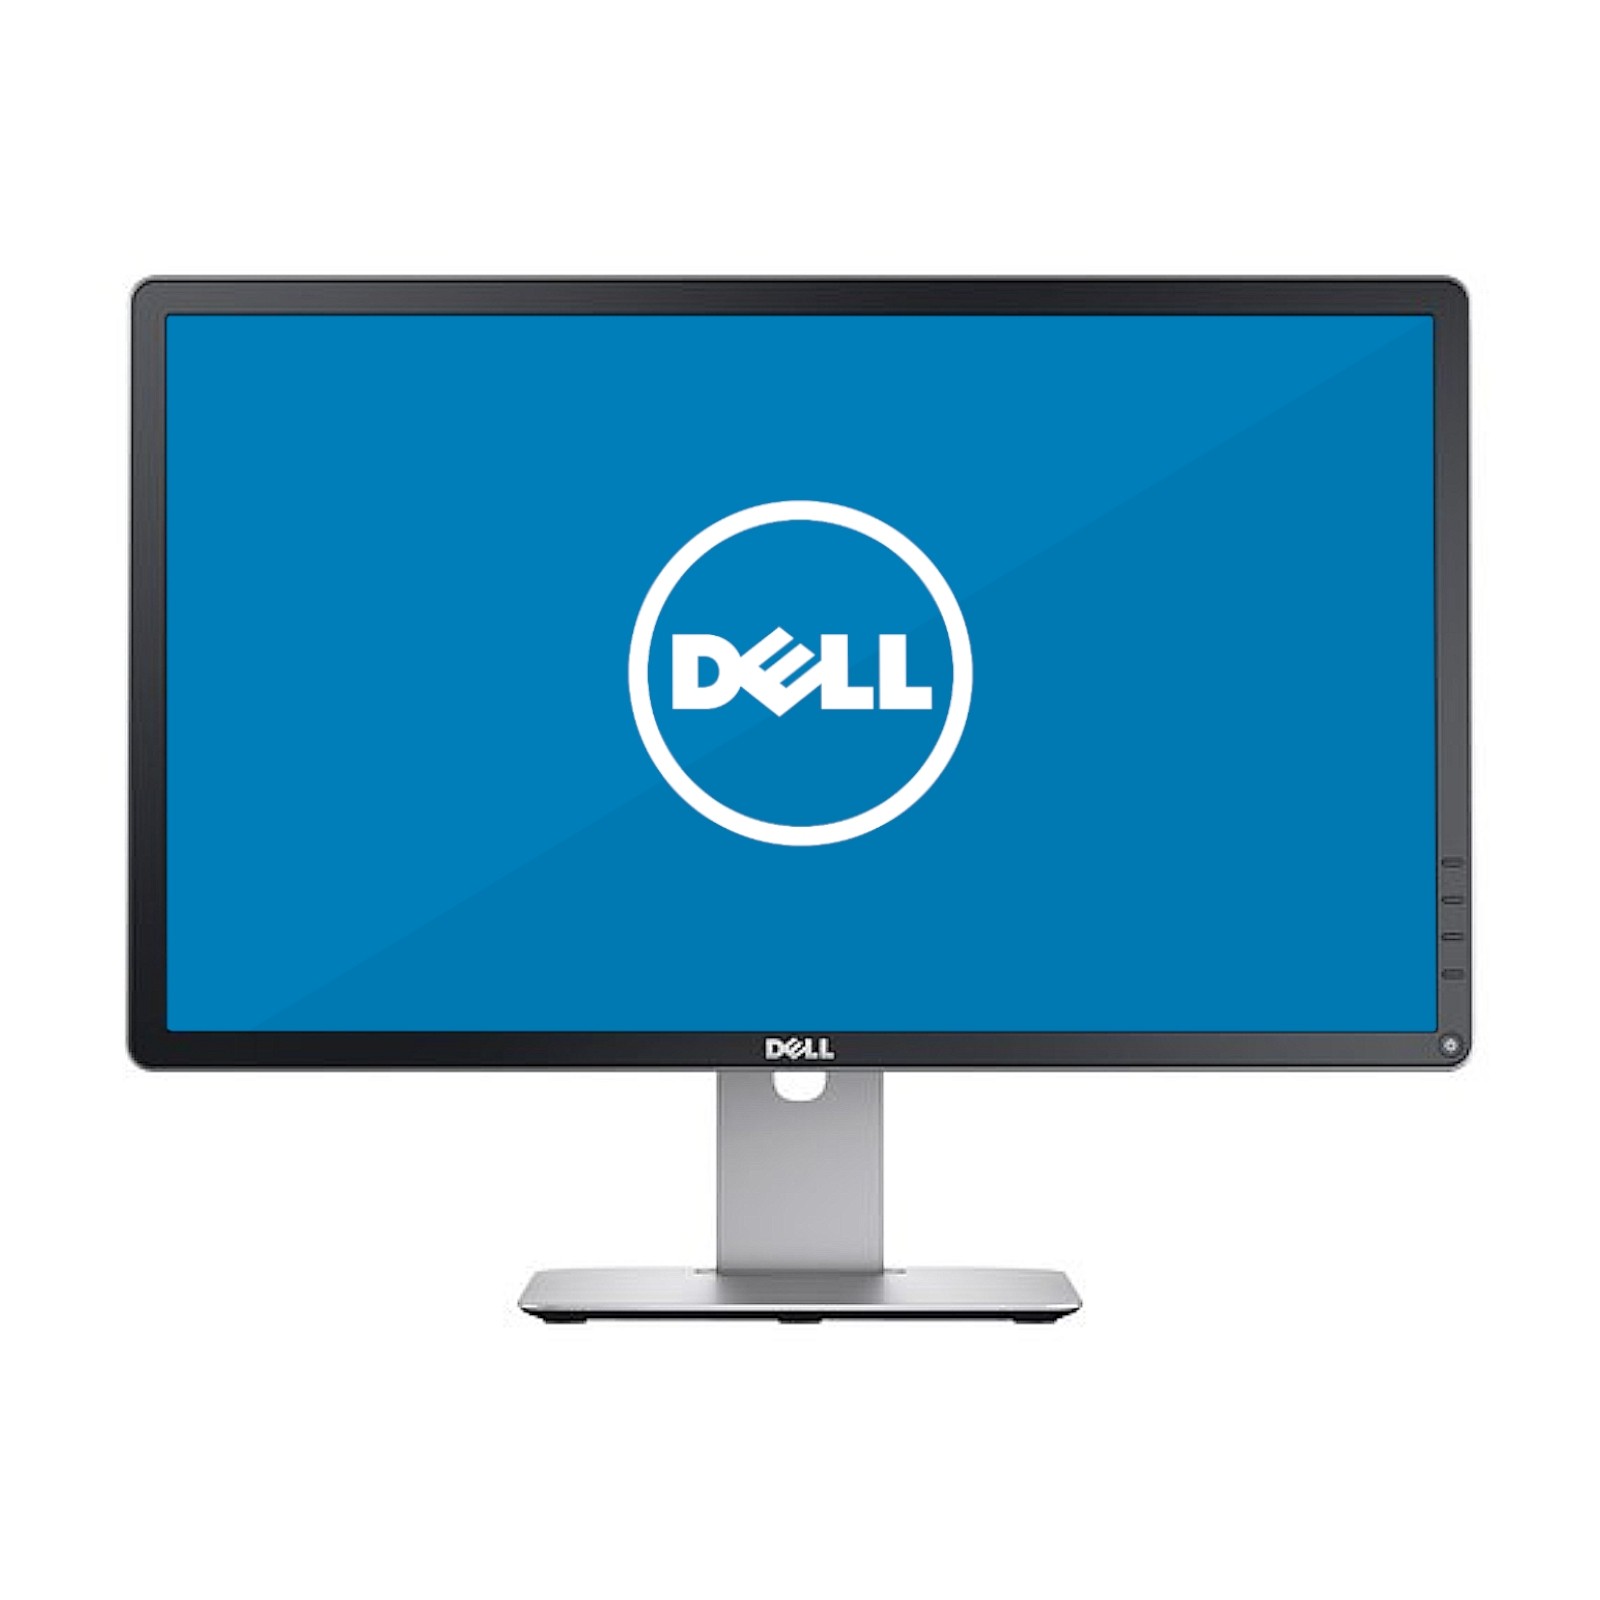 Dell P2314Ht 23" Full HD Black Computer Monitor Front